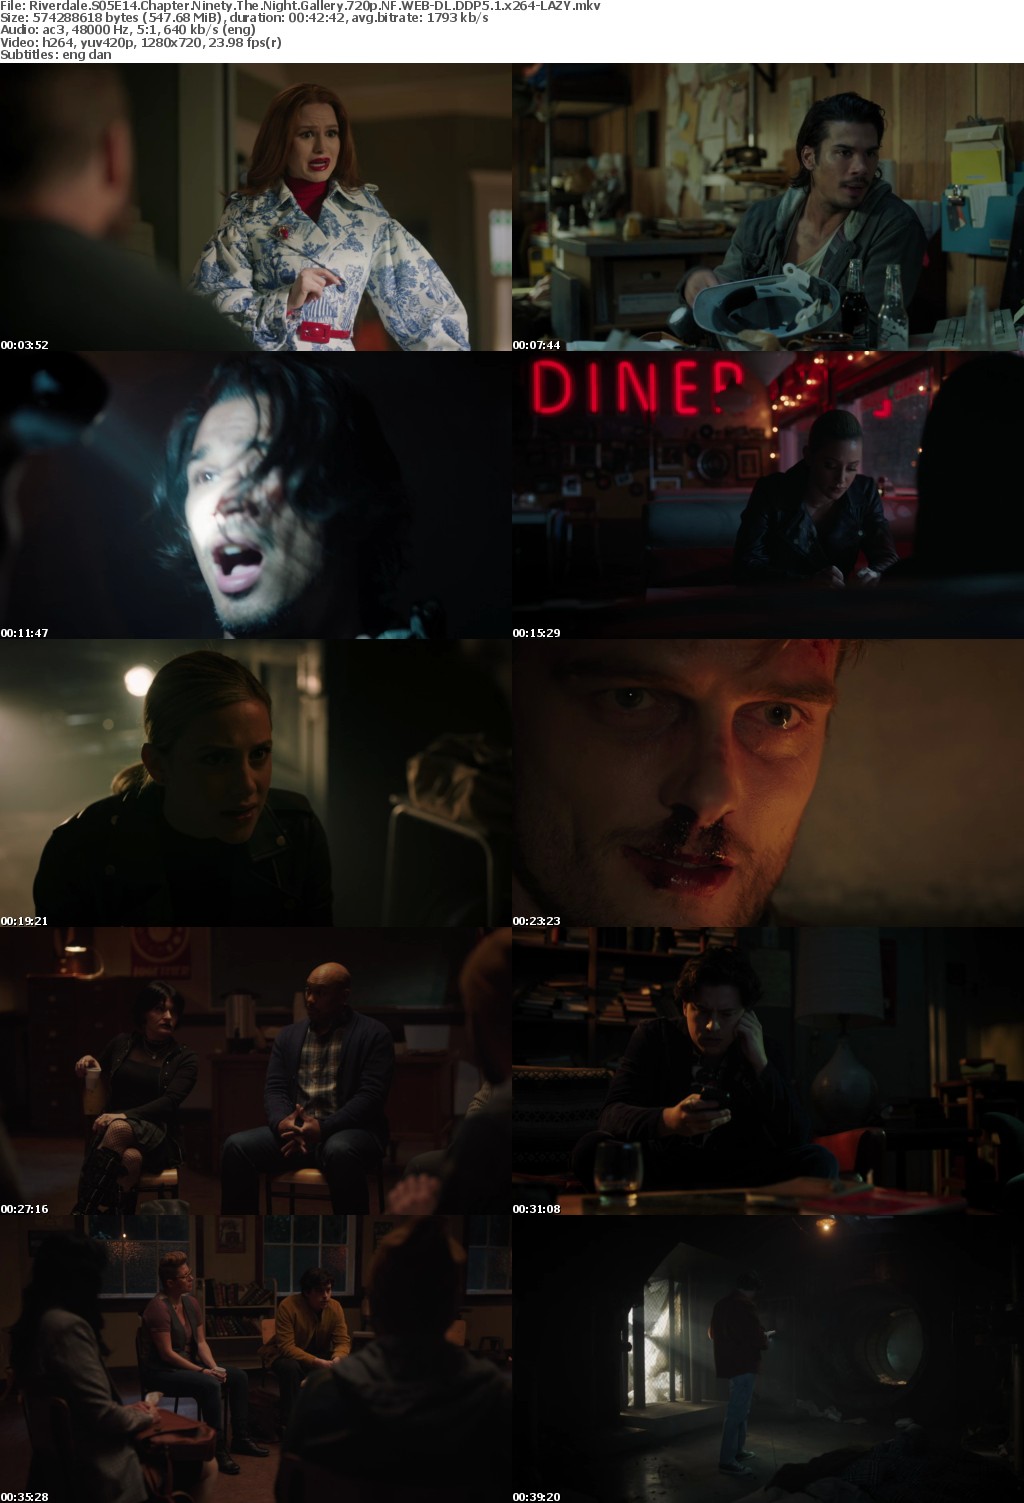 Riverdale US S05E14 Chapter Ninety The Night Gallery 720p NF WEBRip DDP5 1 x264-LAZY